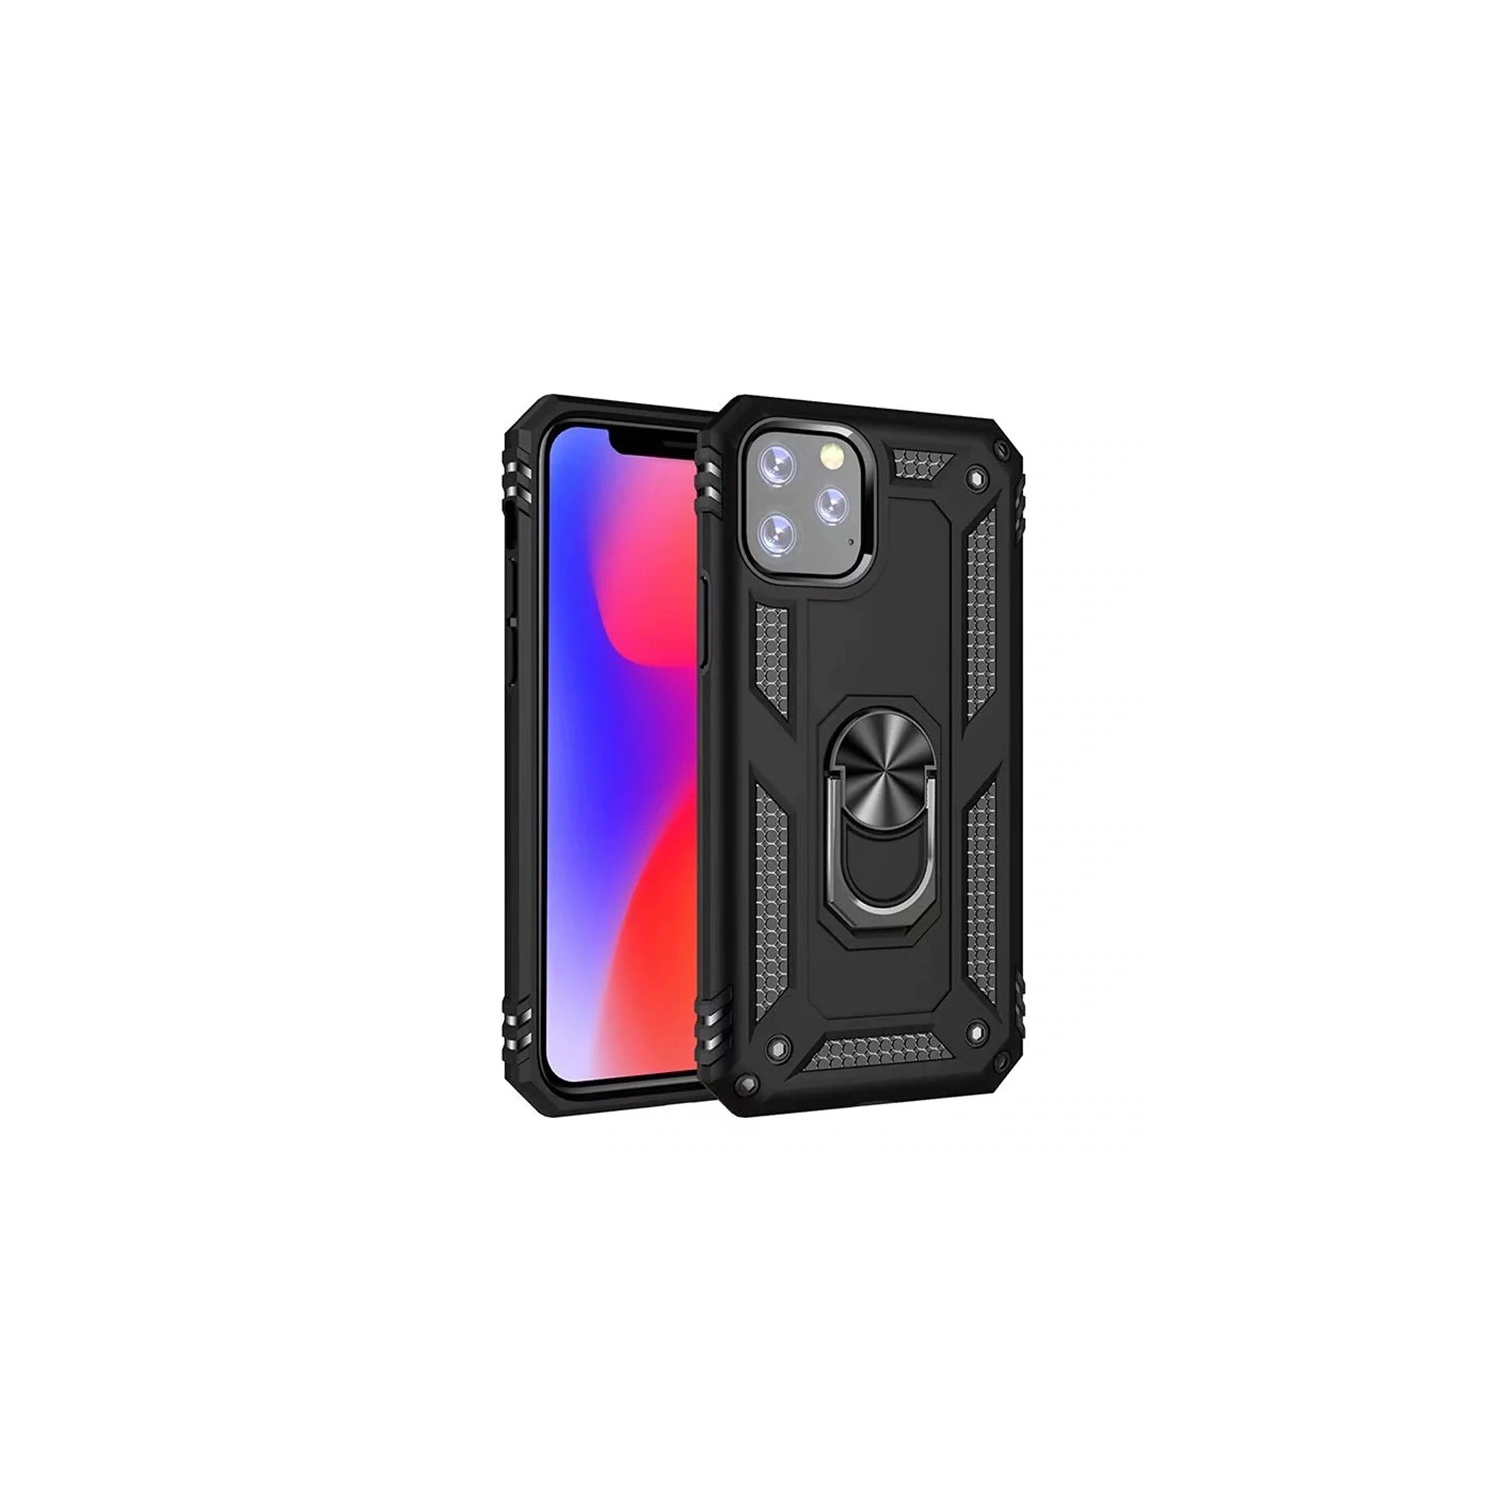 【CSmart】 Anti-Drop Hybrid Magnetic Hard Armor Case with Ring Holder for iPhone 11 Pro Max (6.5"), Black